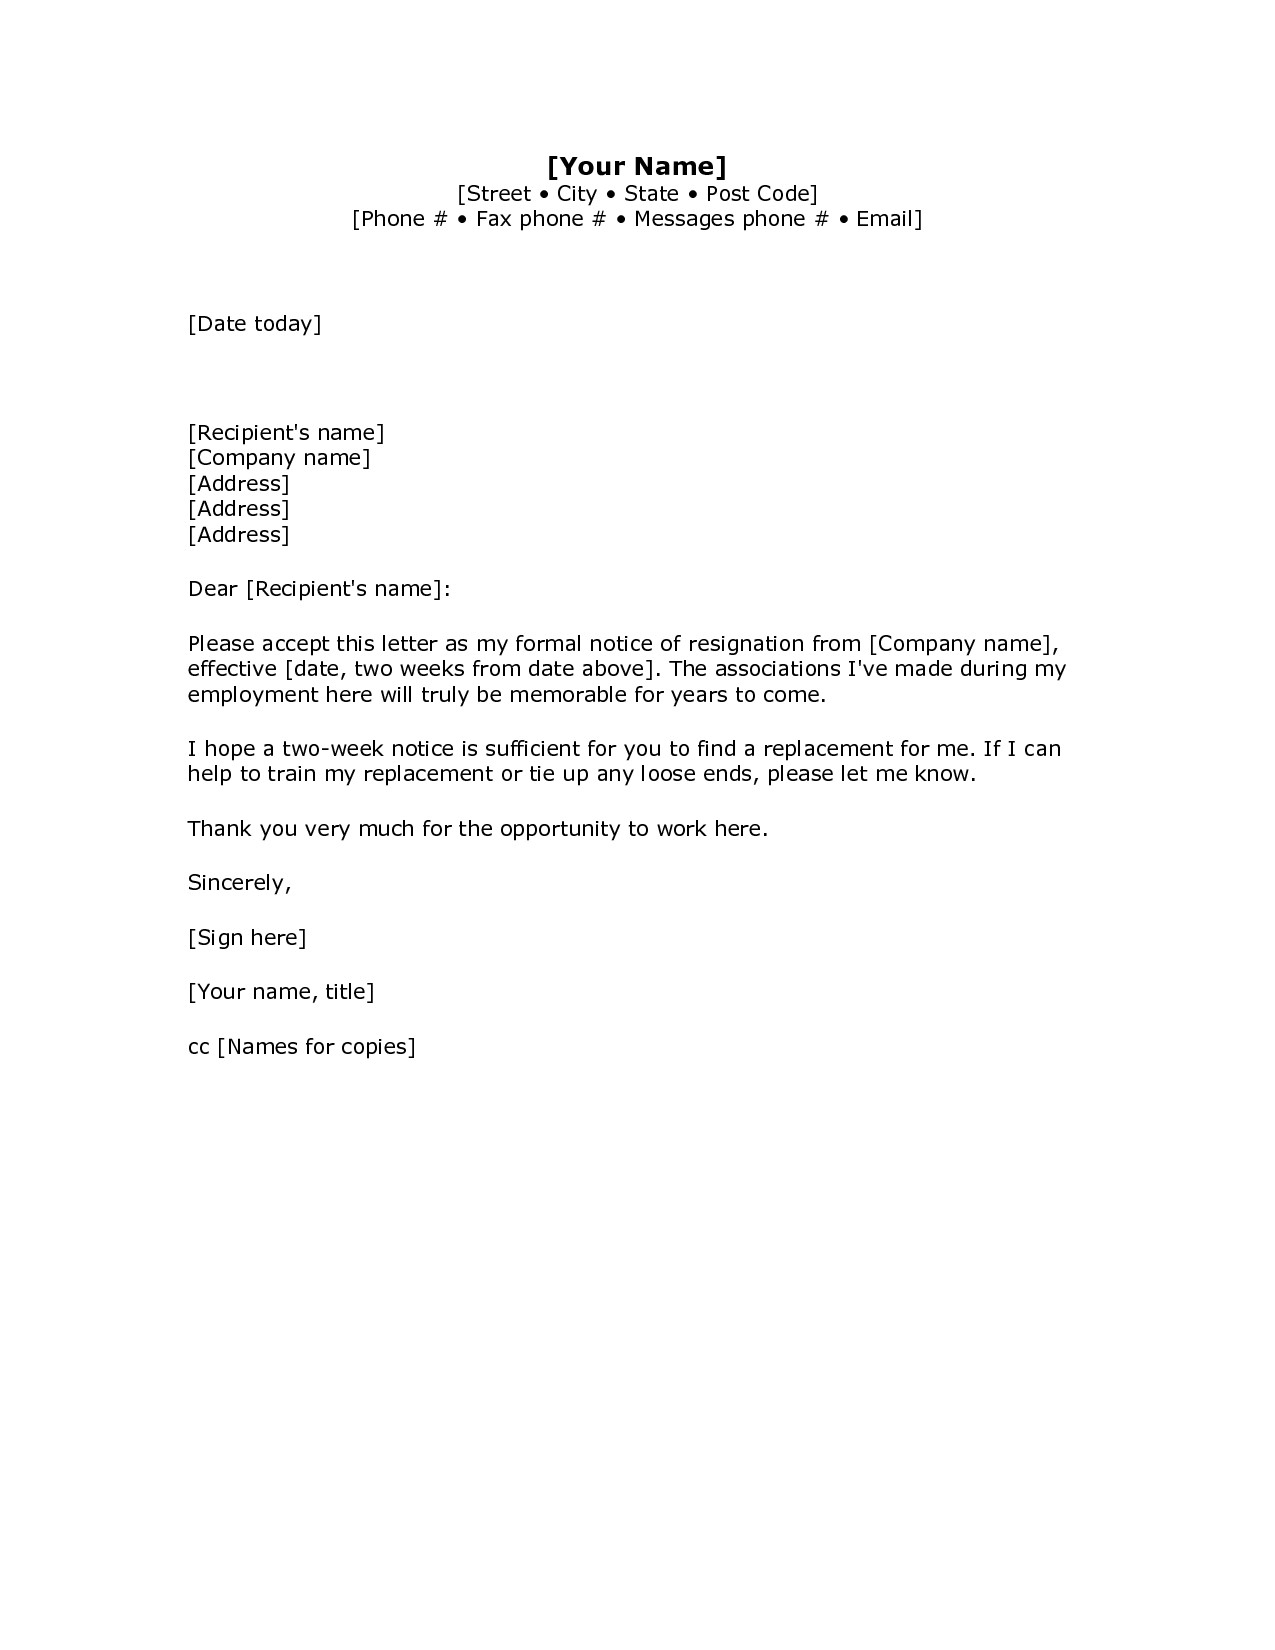 Letter Of Resignation Template  009 Letter Of Resignation Template Casual Valid Weeks Notice Week